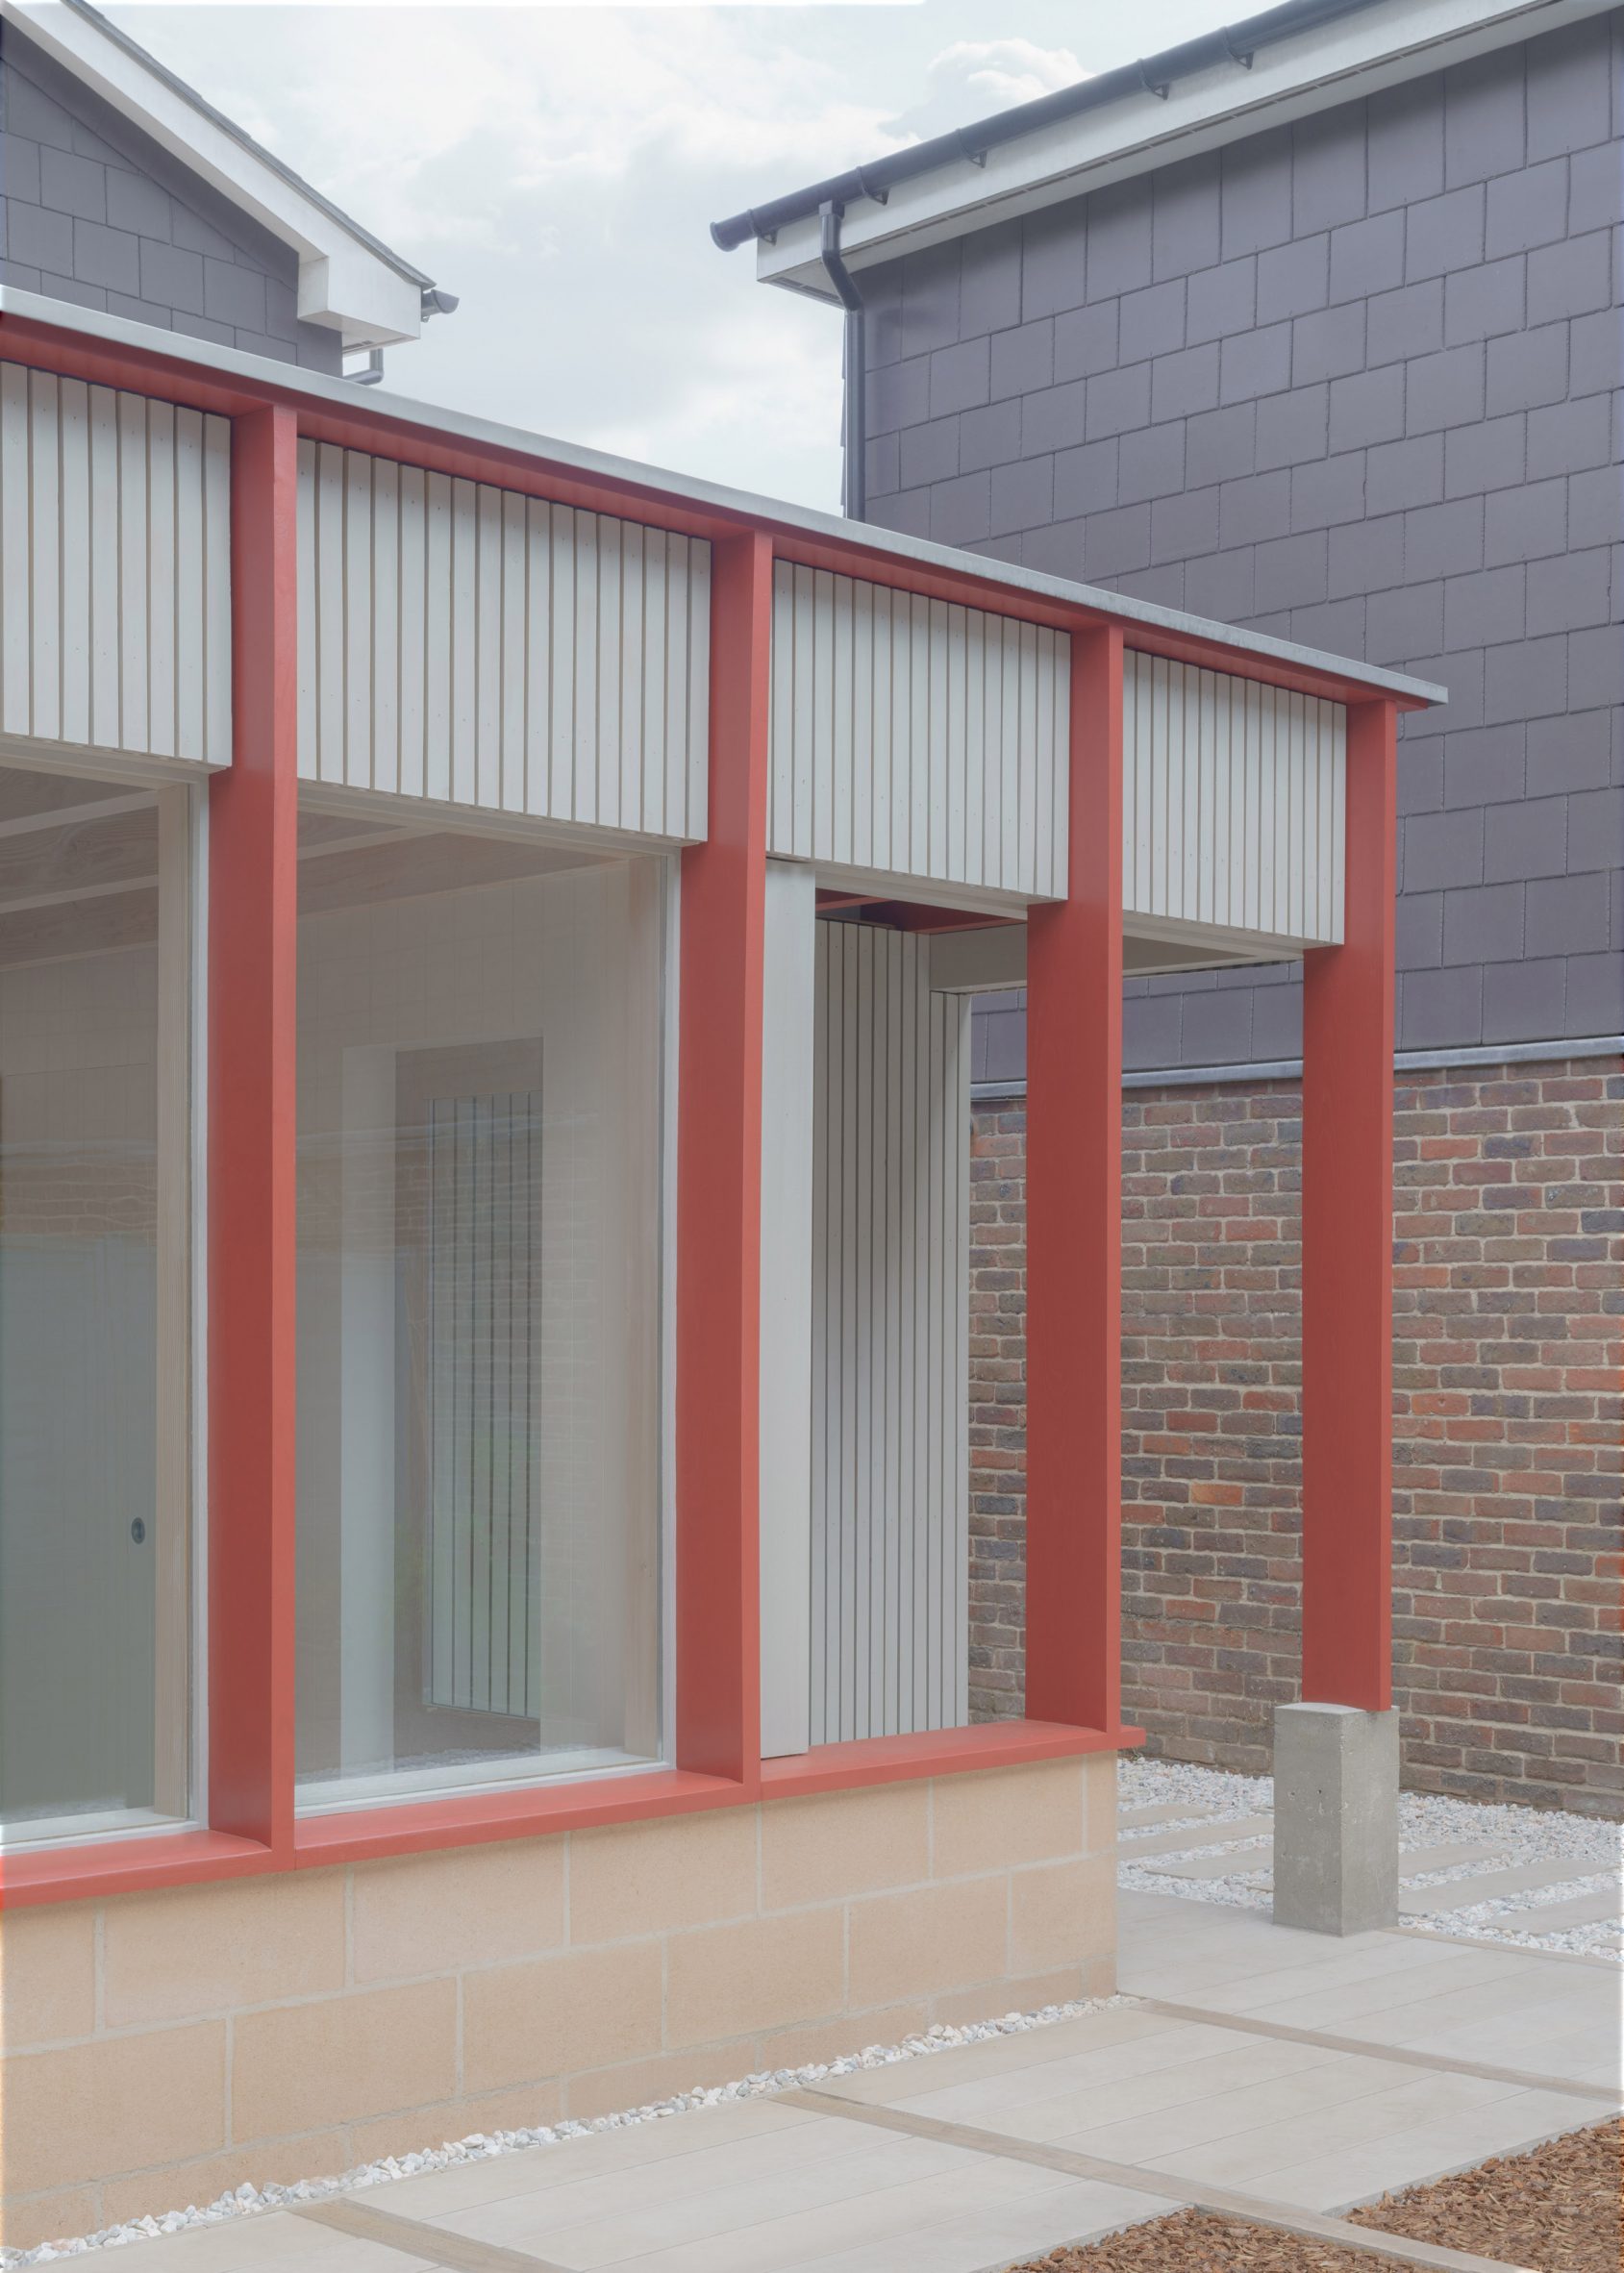 Timber extension with red pillars